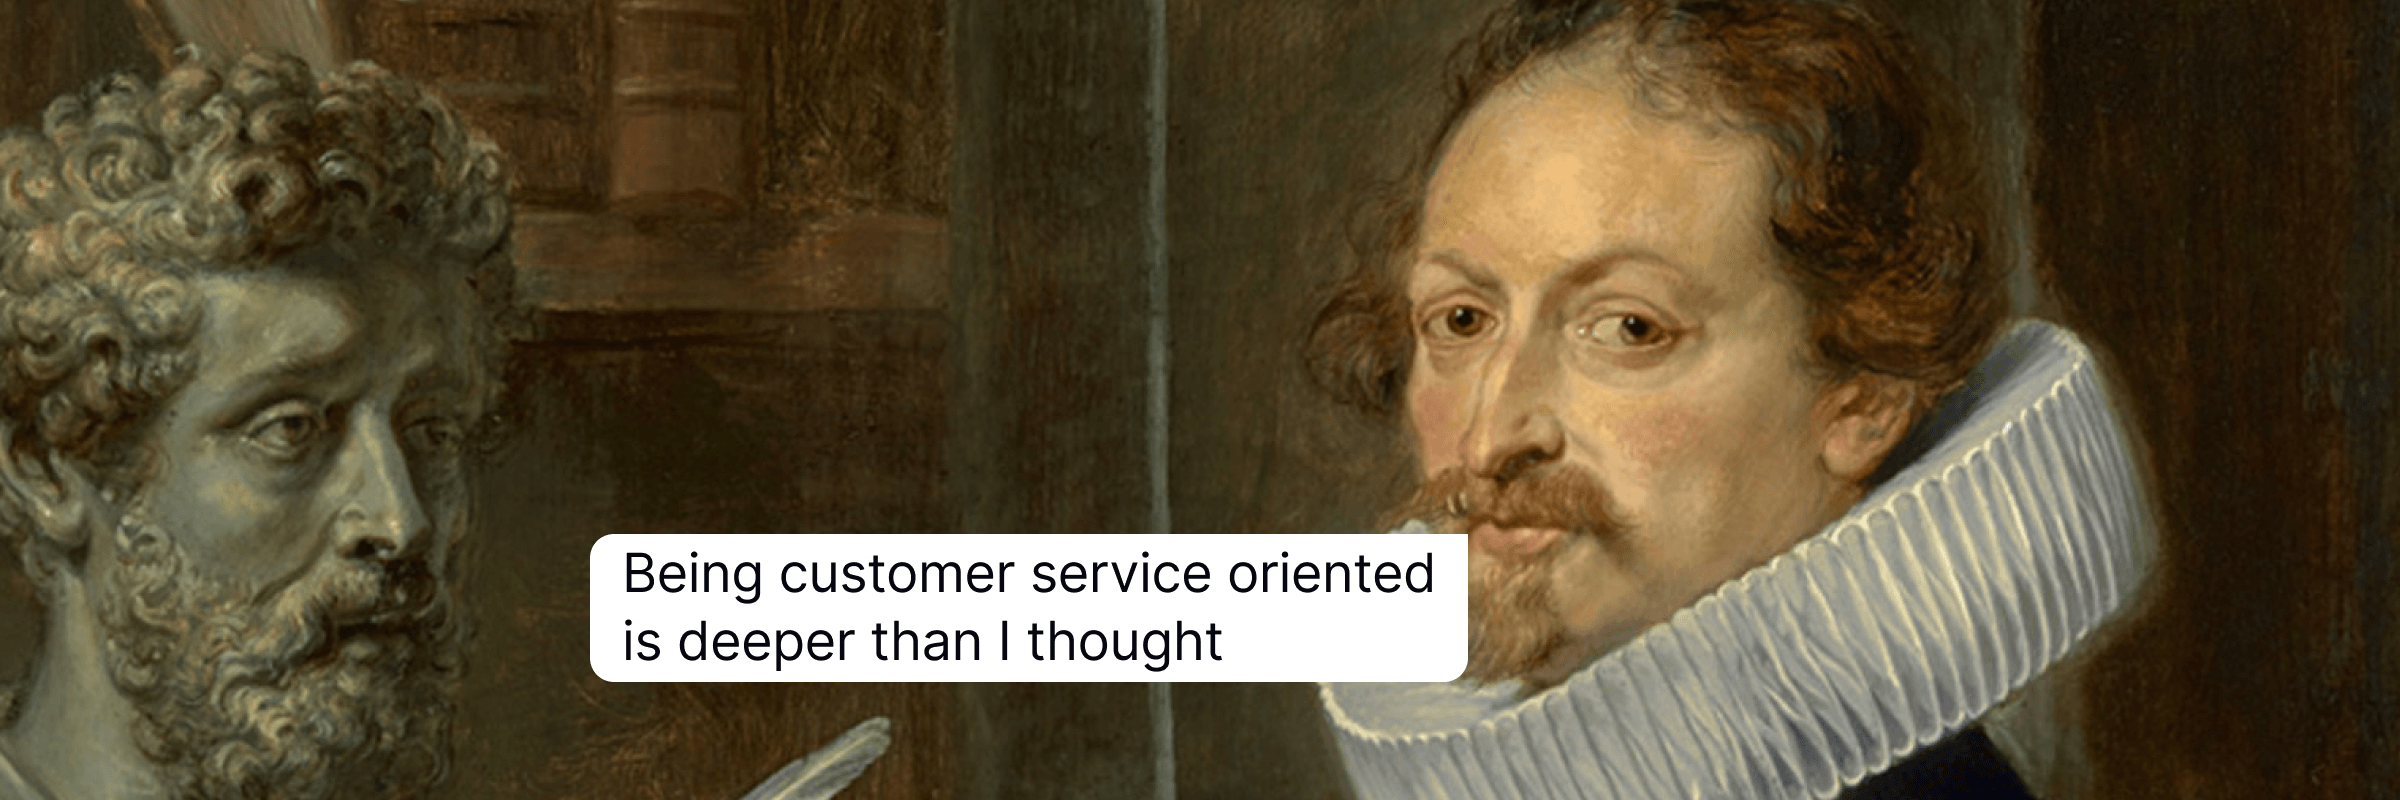 What Does it Mean to Be ‘Customer Service Oriented’ and How to Make It Work?